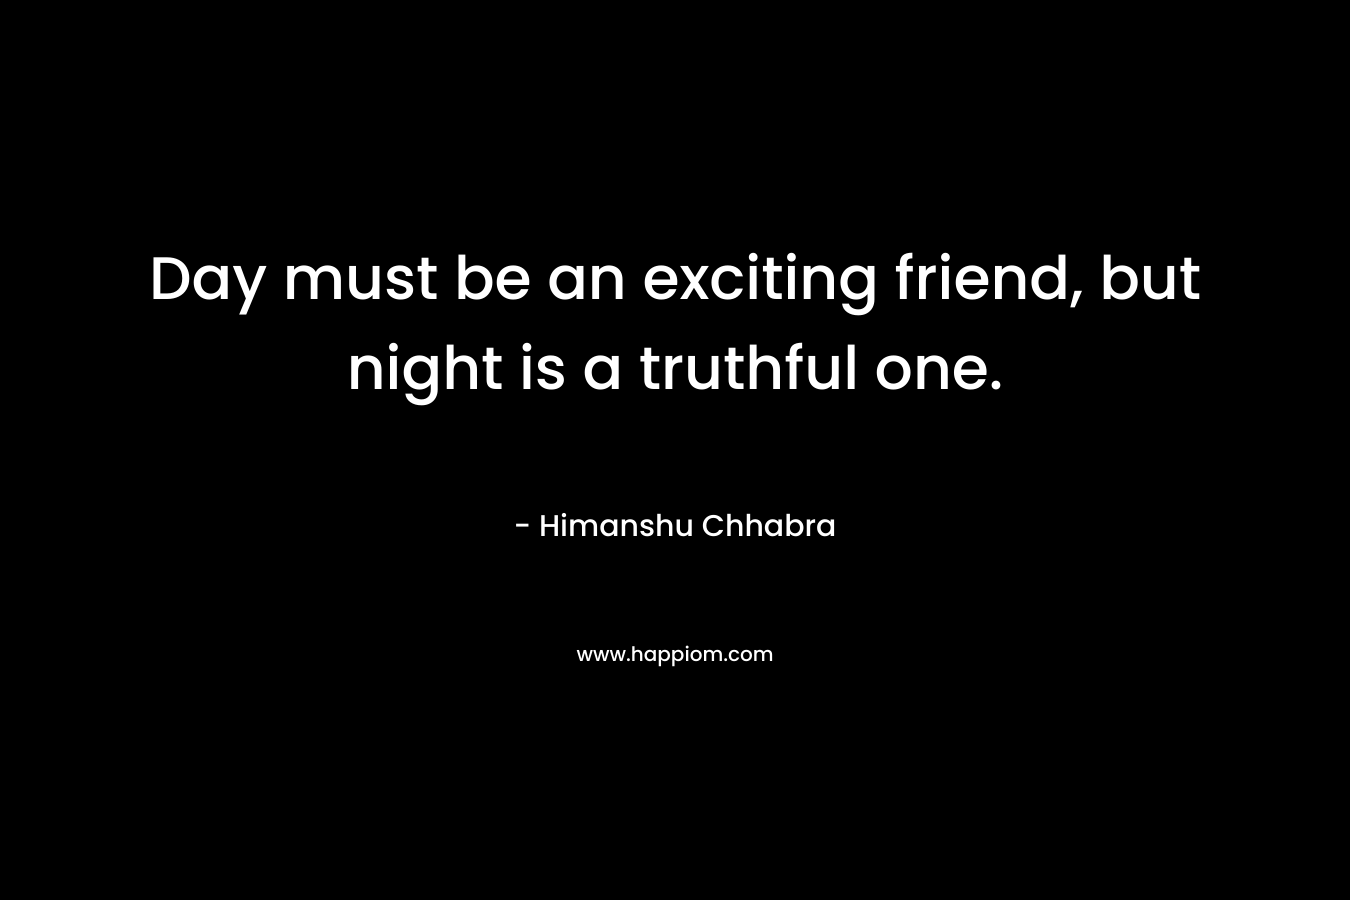 Day must be an exciting friend, but night is a truthful one. – Himanshu Chhabra